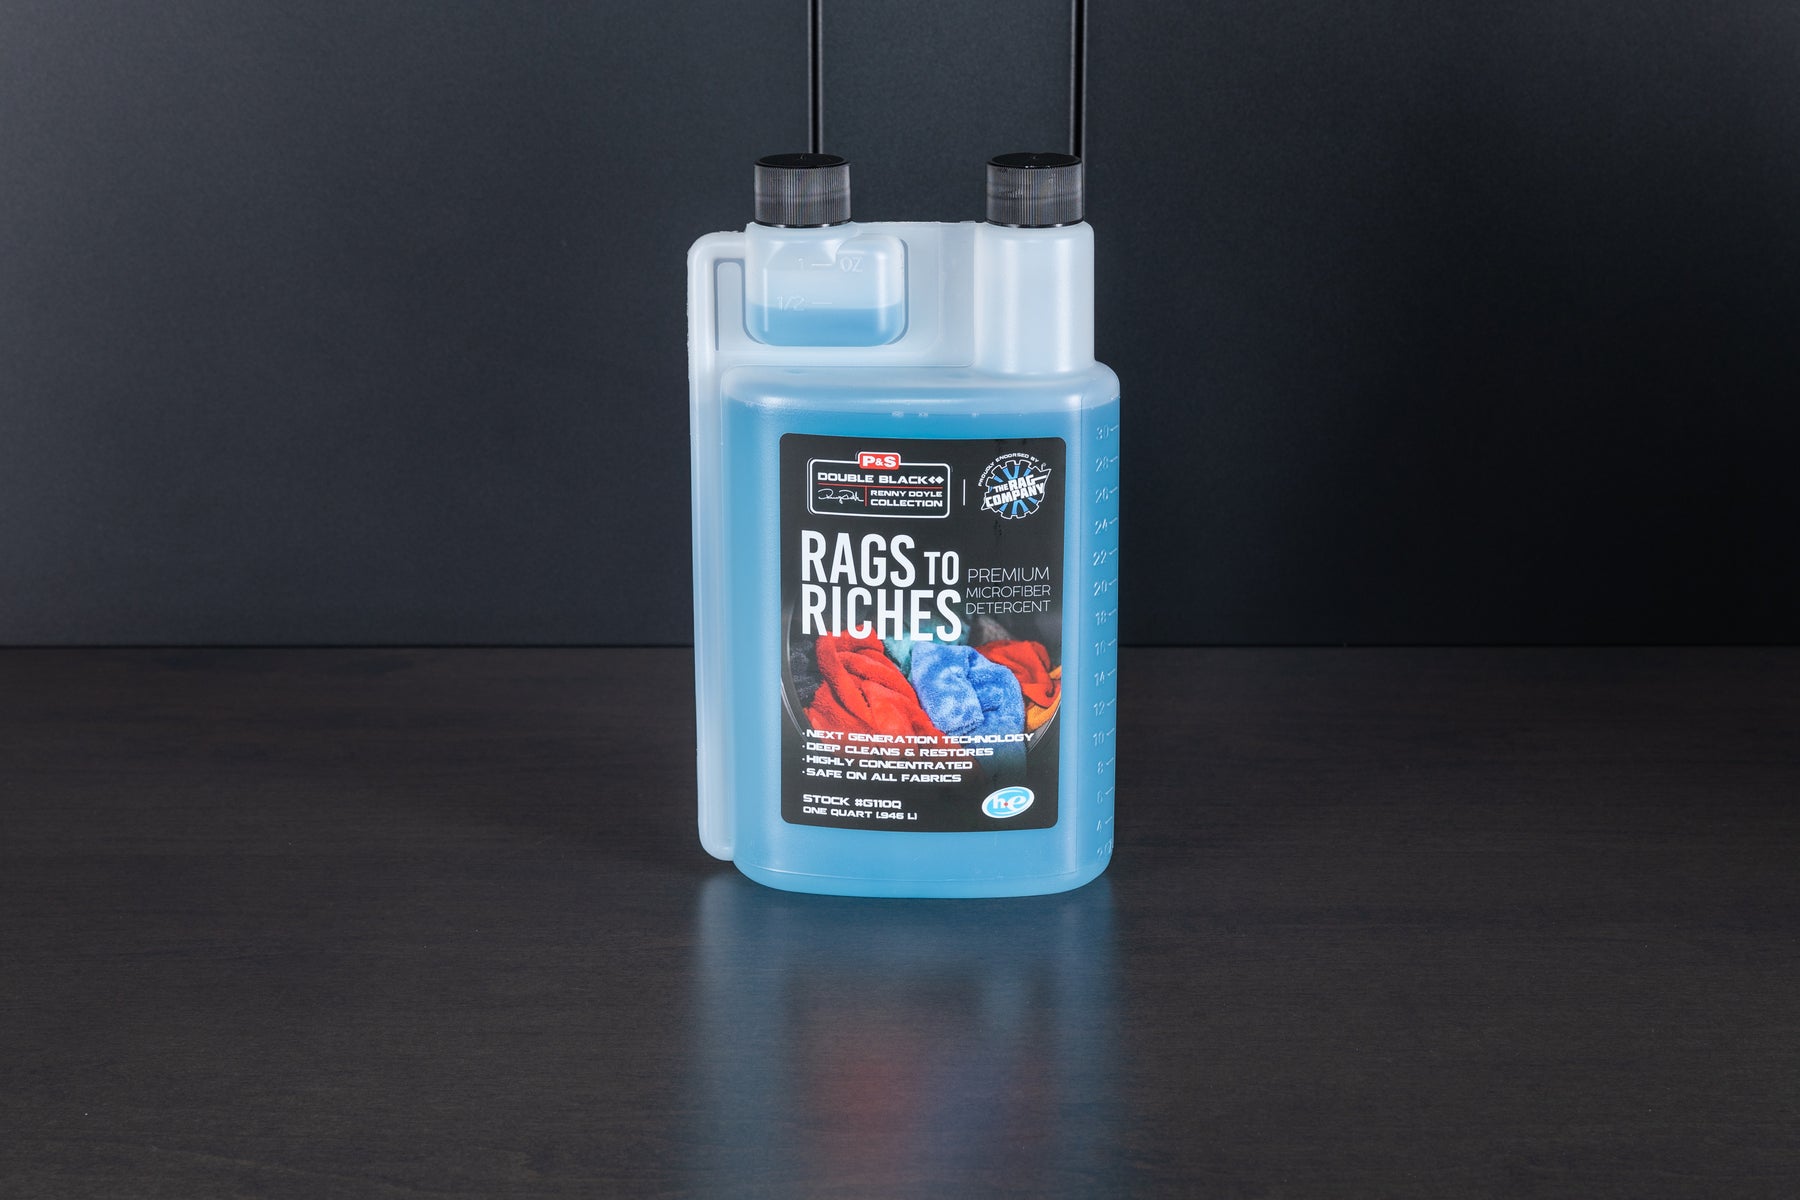  P&S Professional Detail Products - Rags to Riches - Premium Microfiber  Detergent, Deep Cleans and Restores, Safe on All Fabrics, Highly  Concentrated, Next Generation Cleaning Technology (1 Quart) : Industrial &  Scientific